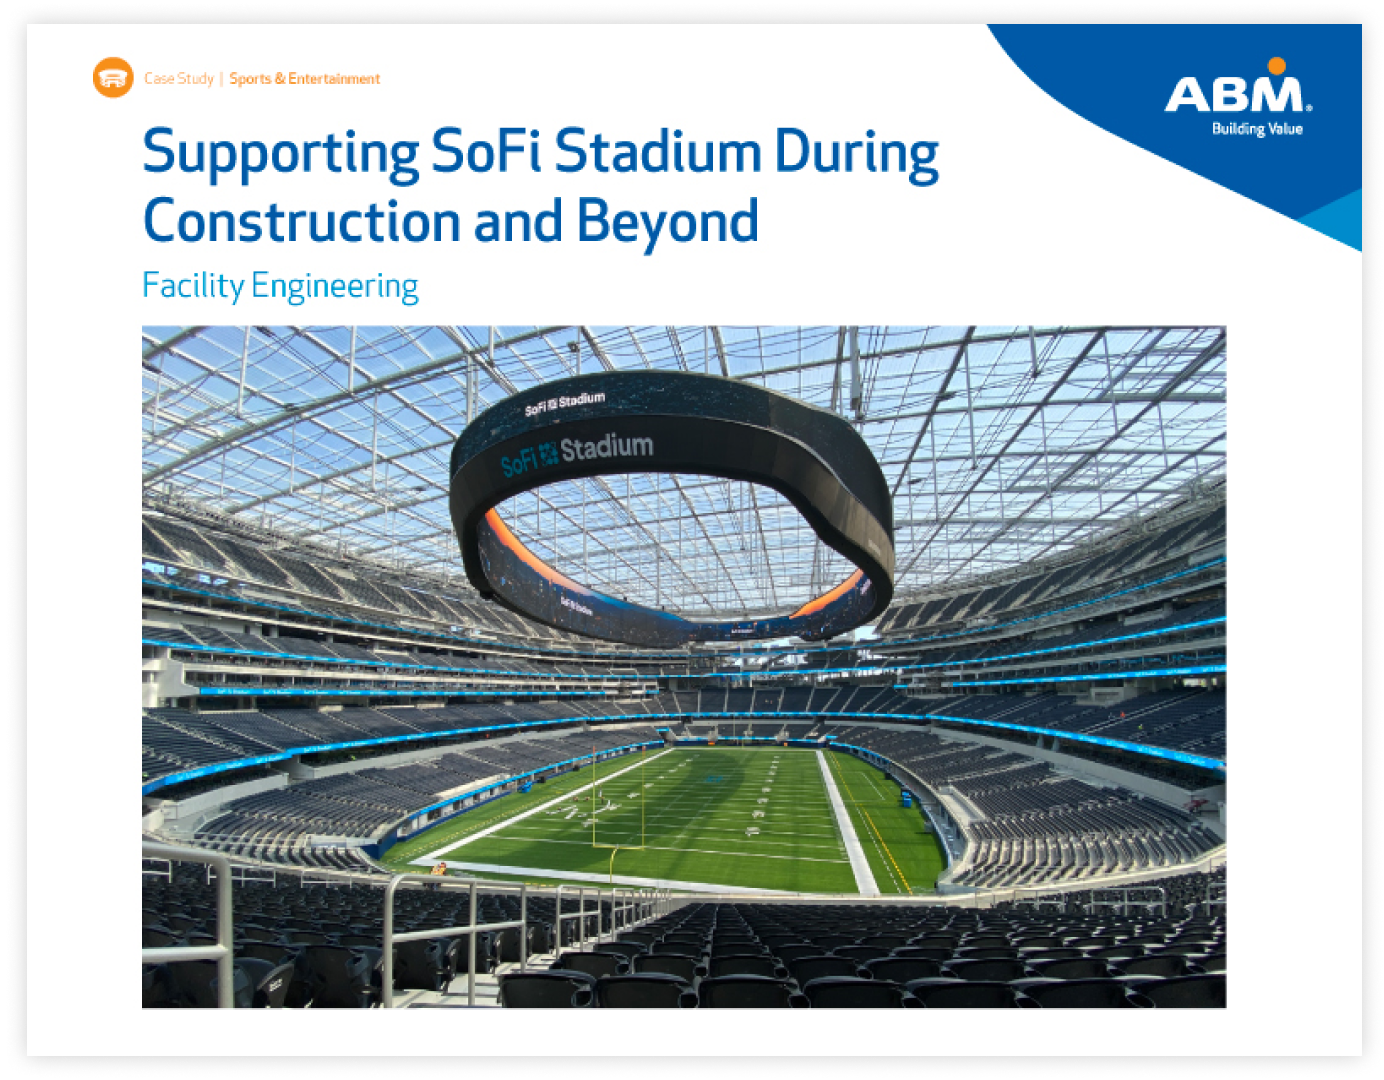 Interior of SoFi Stadium showcasing the seating, football field, clear roof and 360-degree ring screen. Headline reads “Supporting SoFi Stadium During Construction and Beyond.”